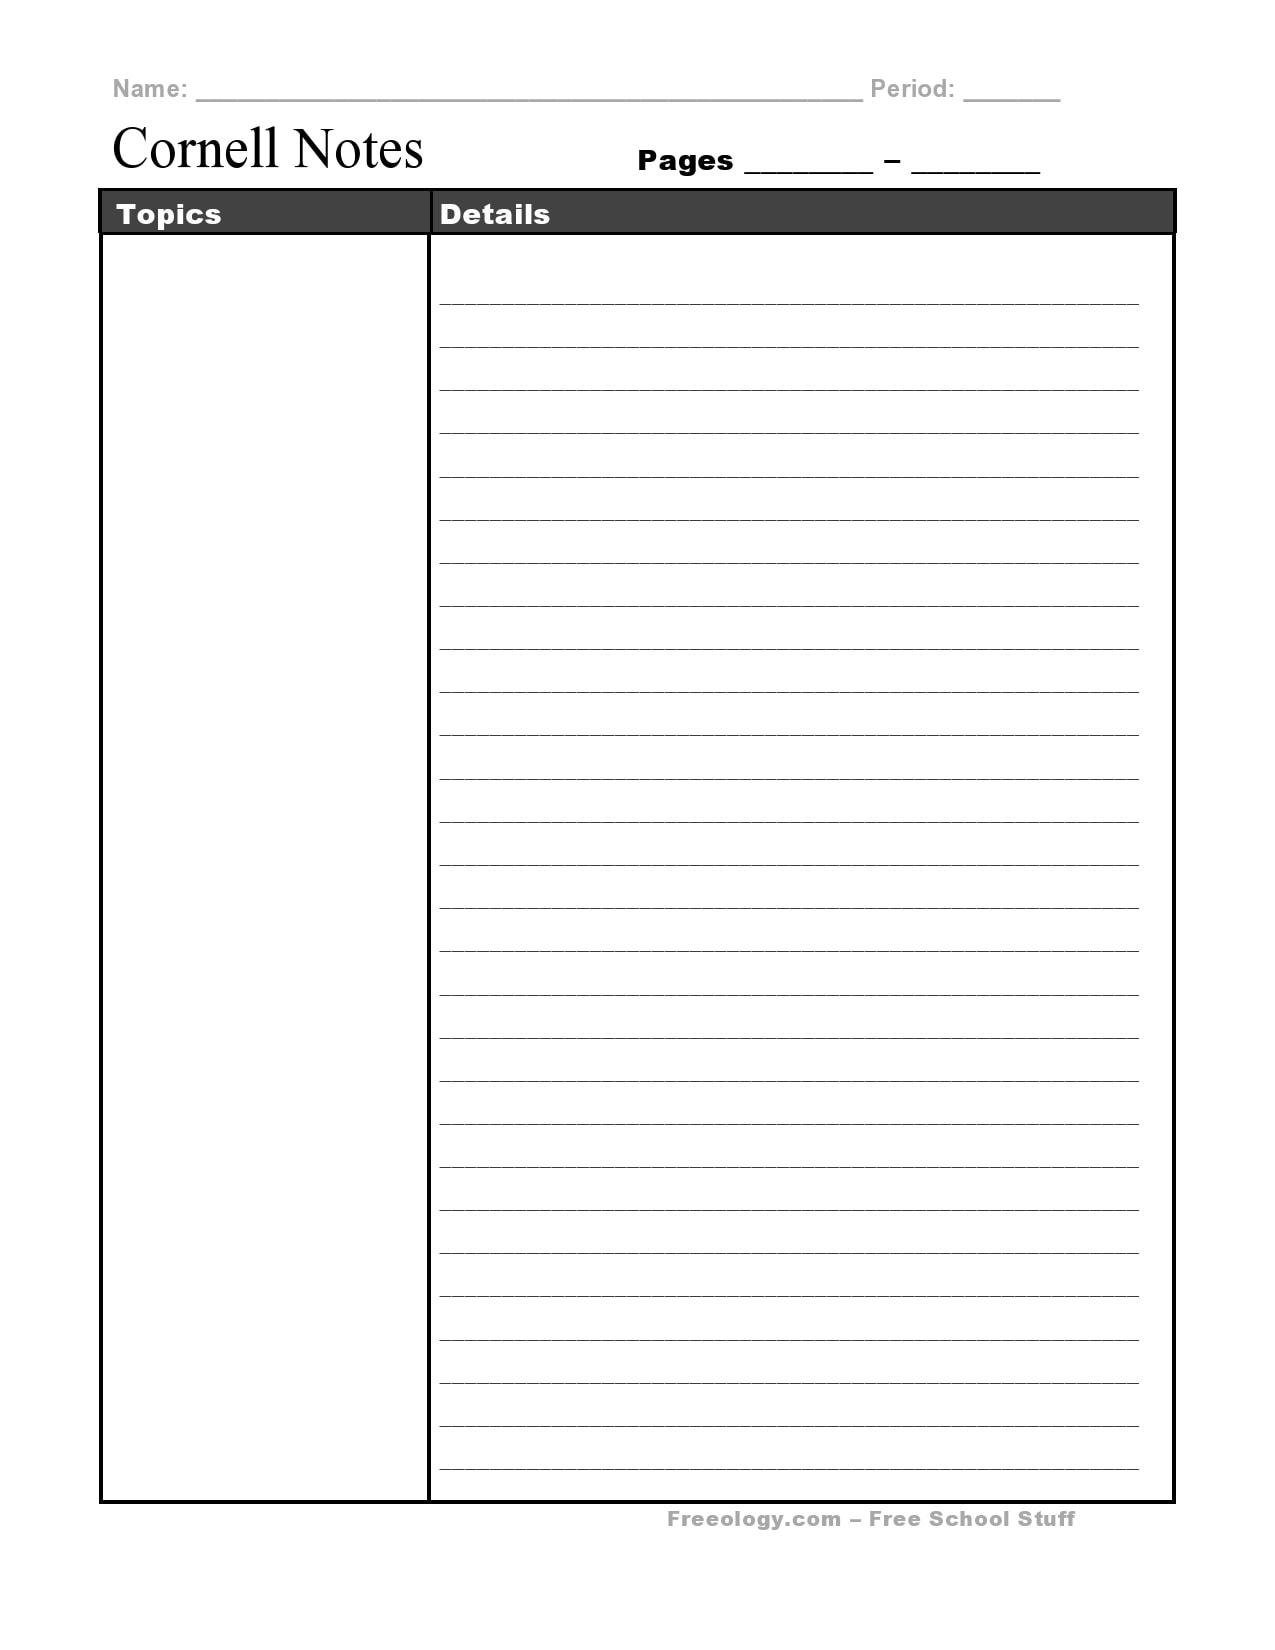 28 Printable Cornell Notes Templates [Free] TemplateArchive